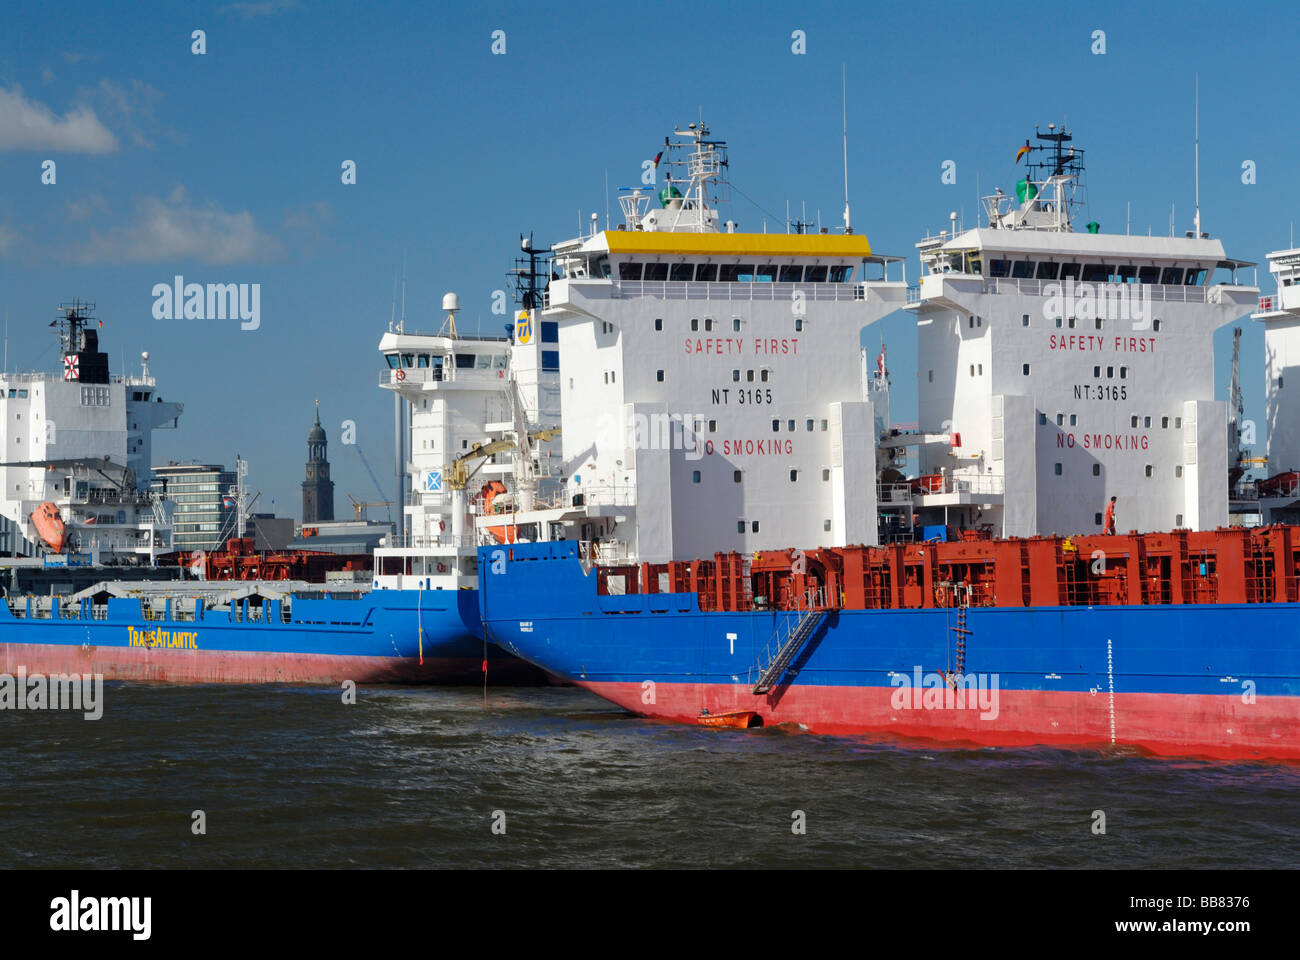 Feeder vessels, not in use because of the economic crisis and the export recession, on the Norderelbe River, Hamburg, Germany,  Stock Photo